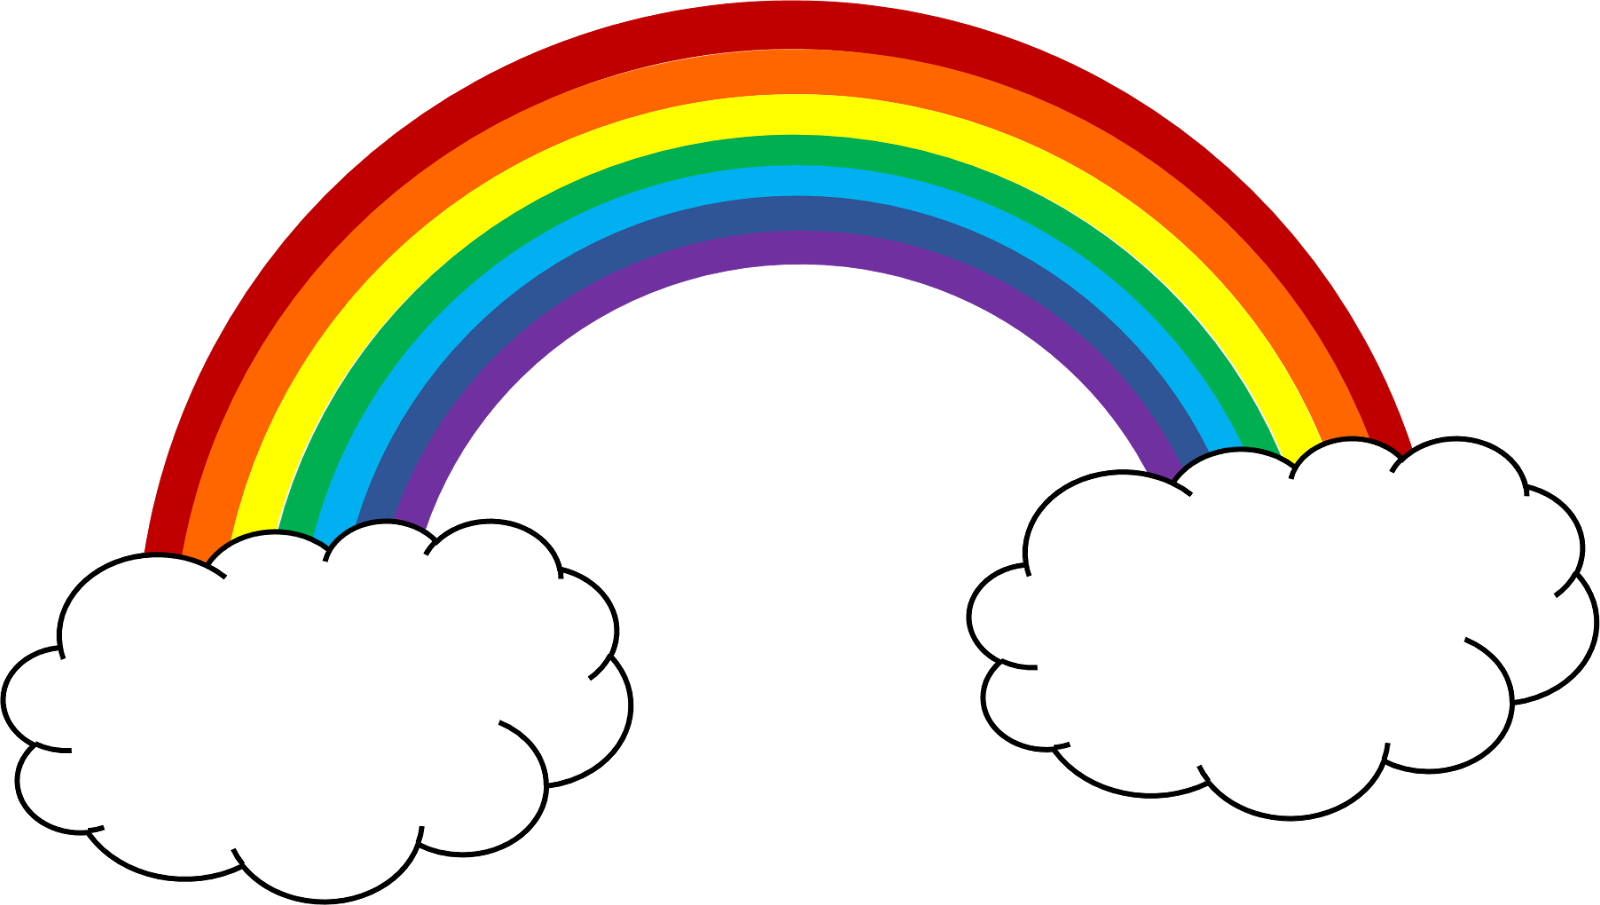 Rainbow Drawing ROYGBIV Clip art - Rainbow Cliparts png download - 1600 ...